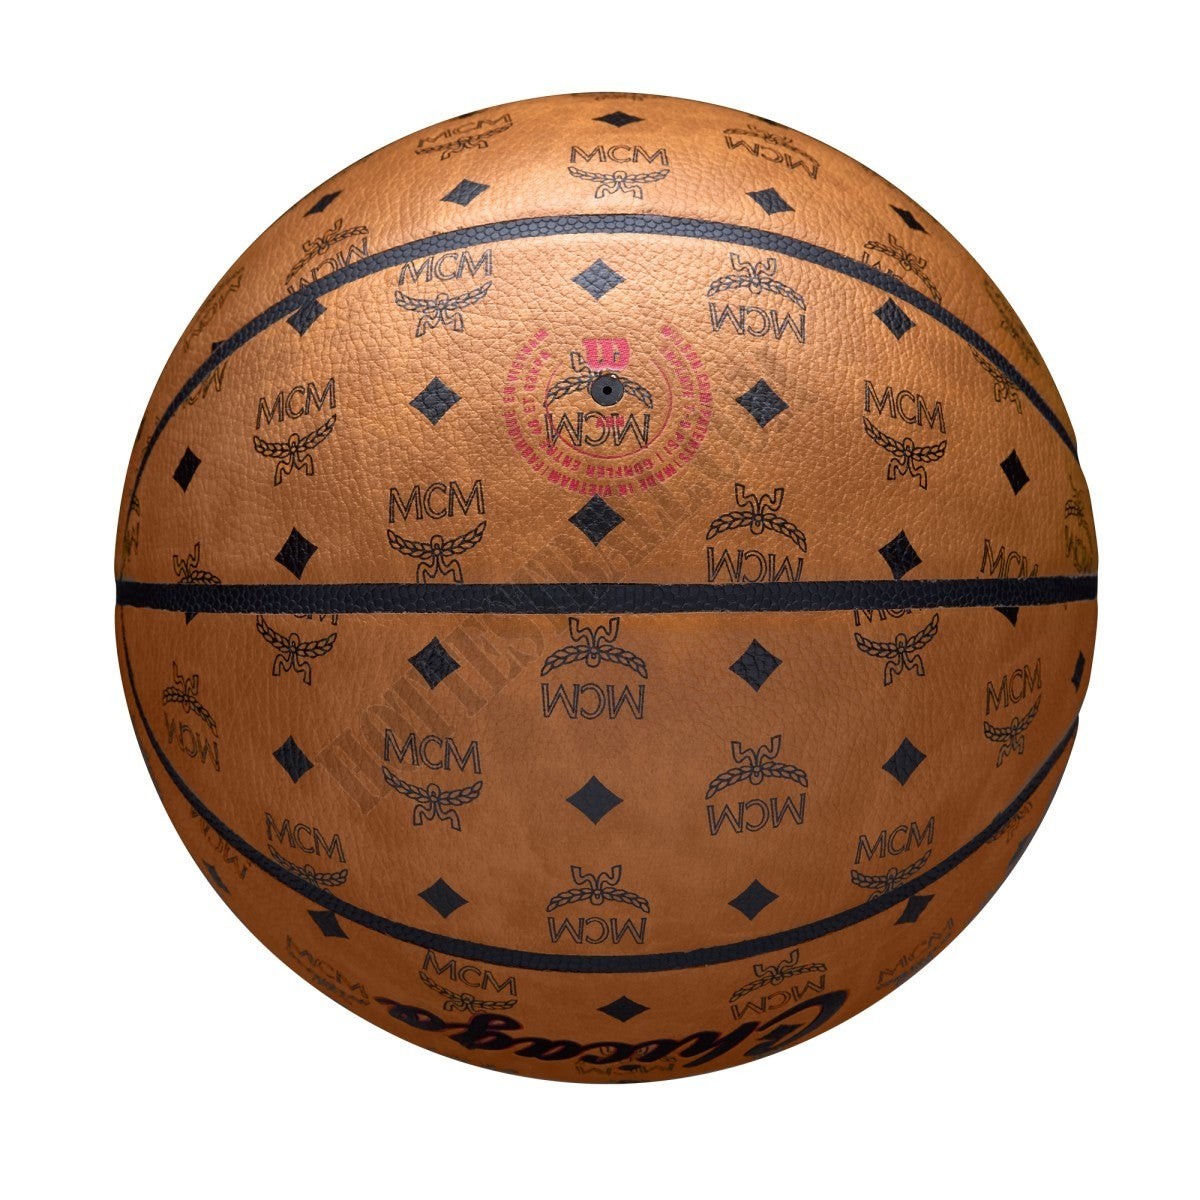 MCM x Chicago Limited Edition Basketball - Wilson Discount Store - -8